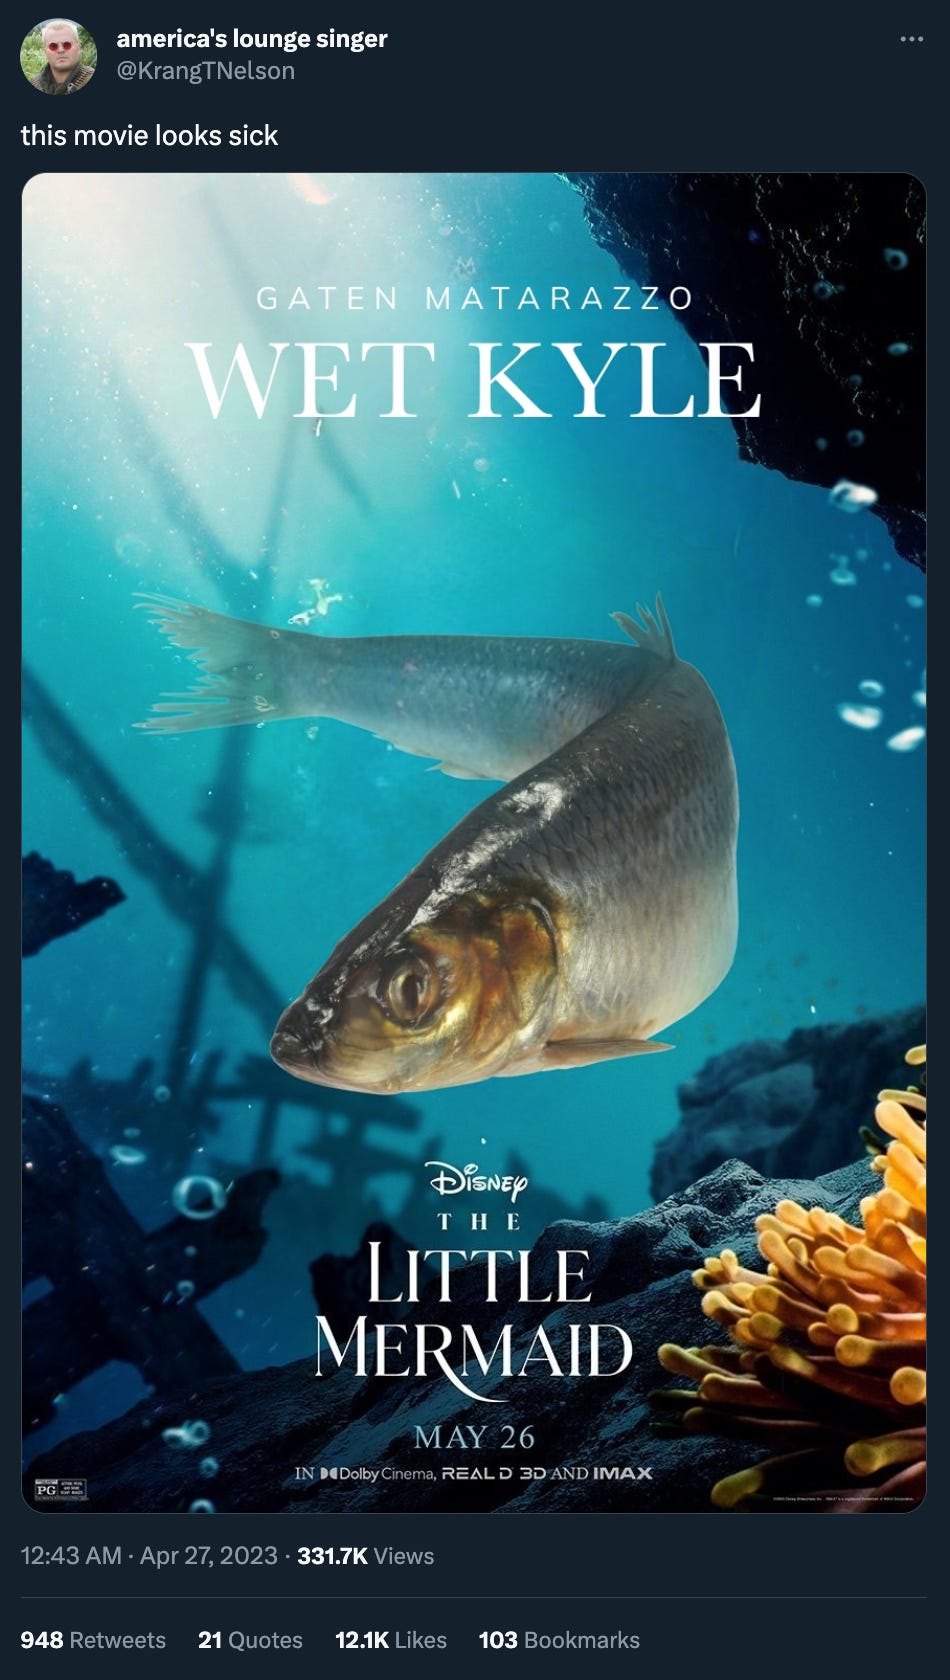 Tweet by KrangTNelson: “this movie looks sick” with a Little Mermaid character poster of everyone’s favorite undersea guy, Wet Kyle, played by Gaten Matarazzo. He’s just a fish. 